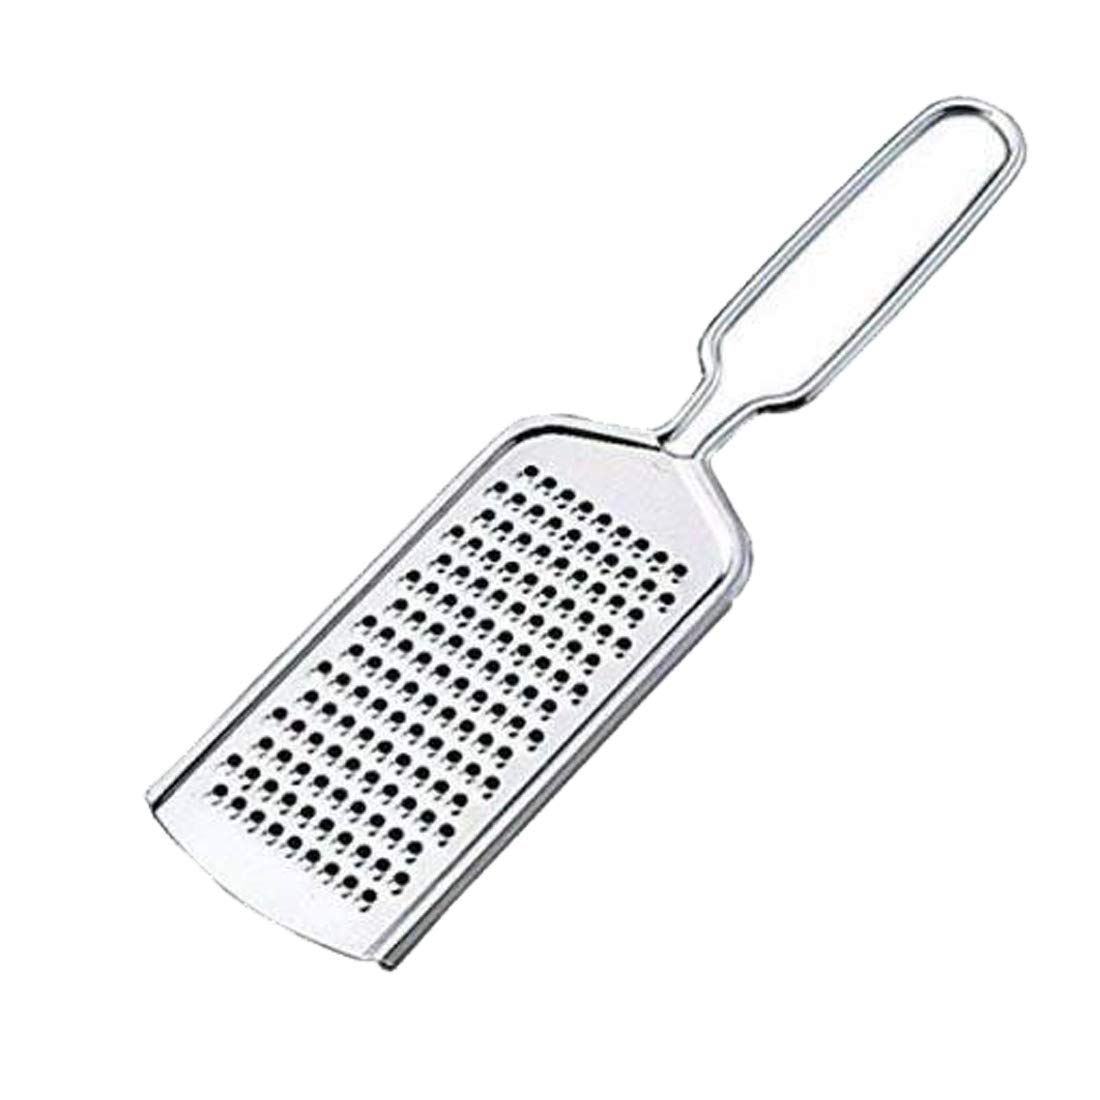 Stainless Steel Cheese Grater with Natural Wood Handle for Parmesan Cheese  Lemon, Ginger, Cheese, Nutmeg, Potato, Chocolate and Garlic Small